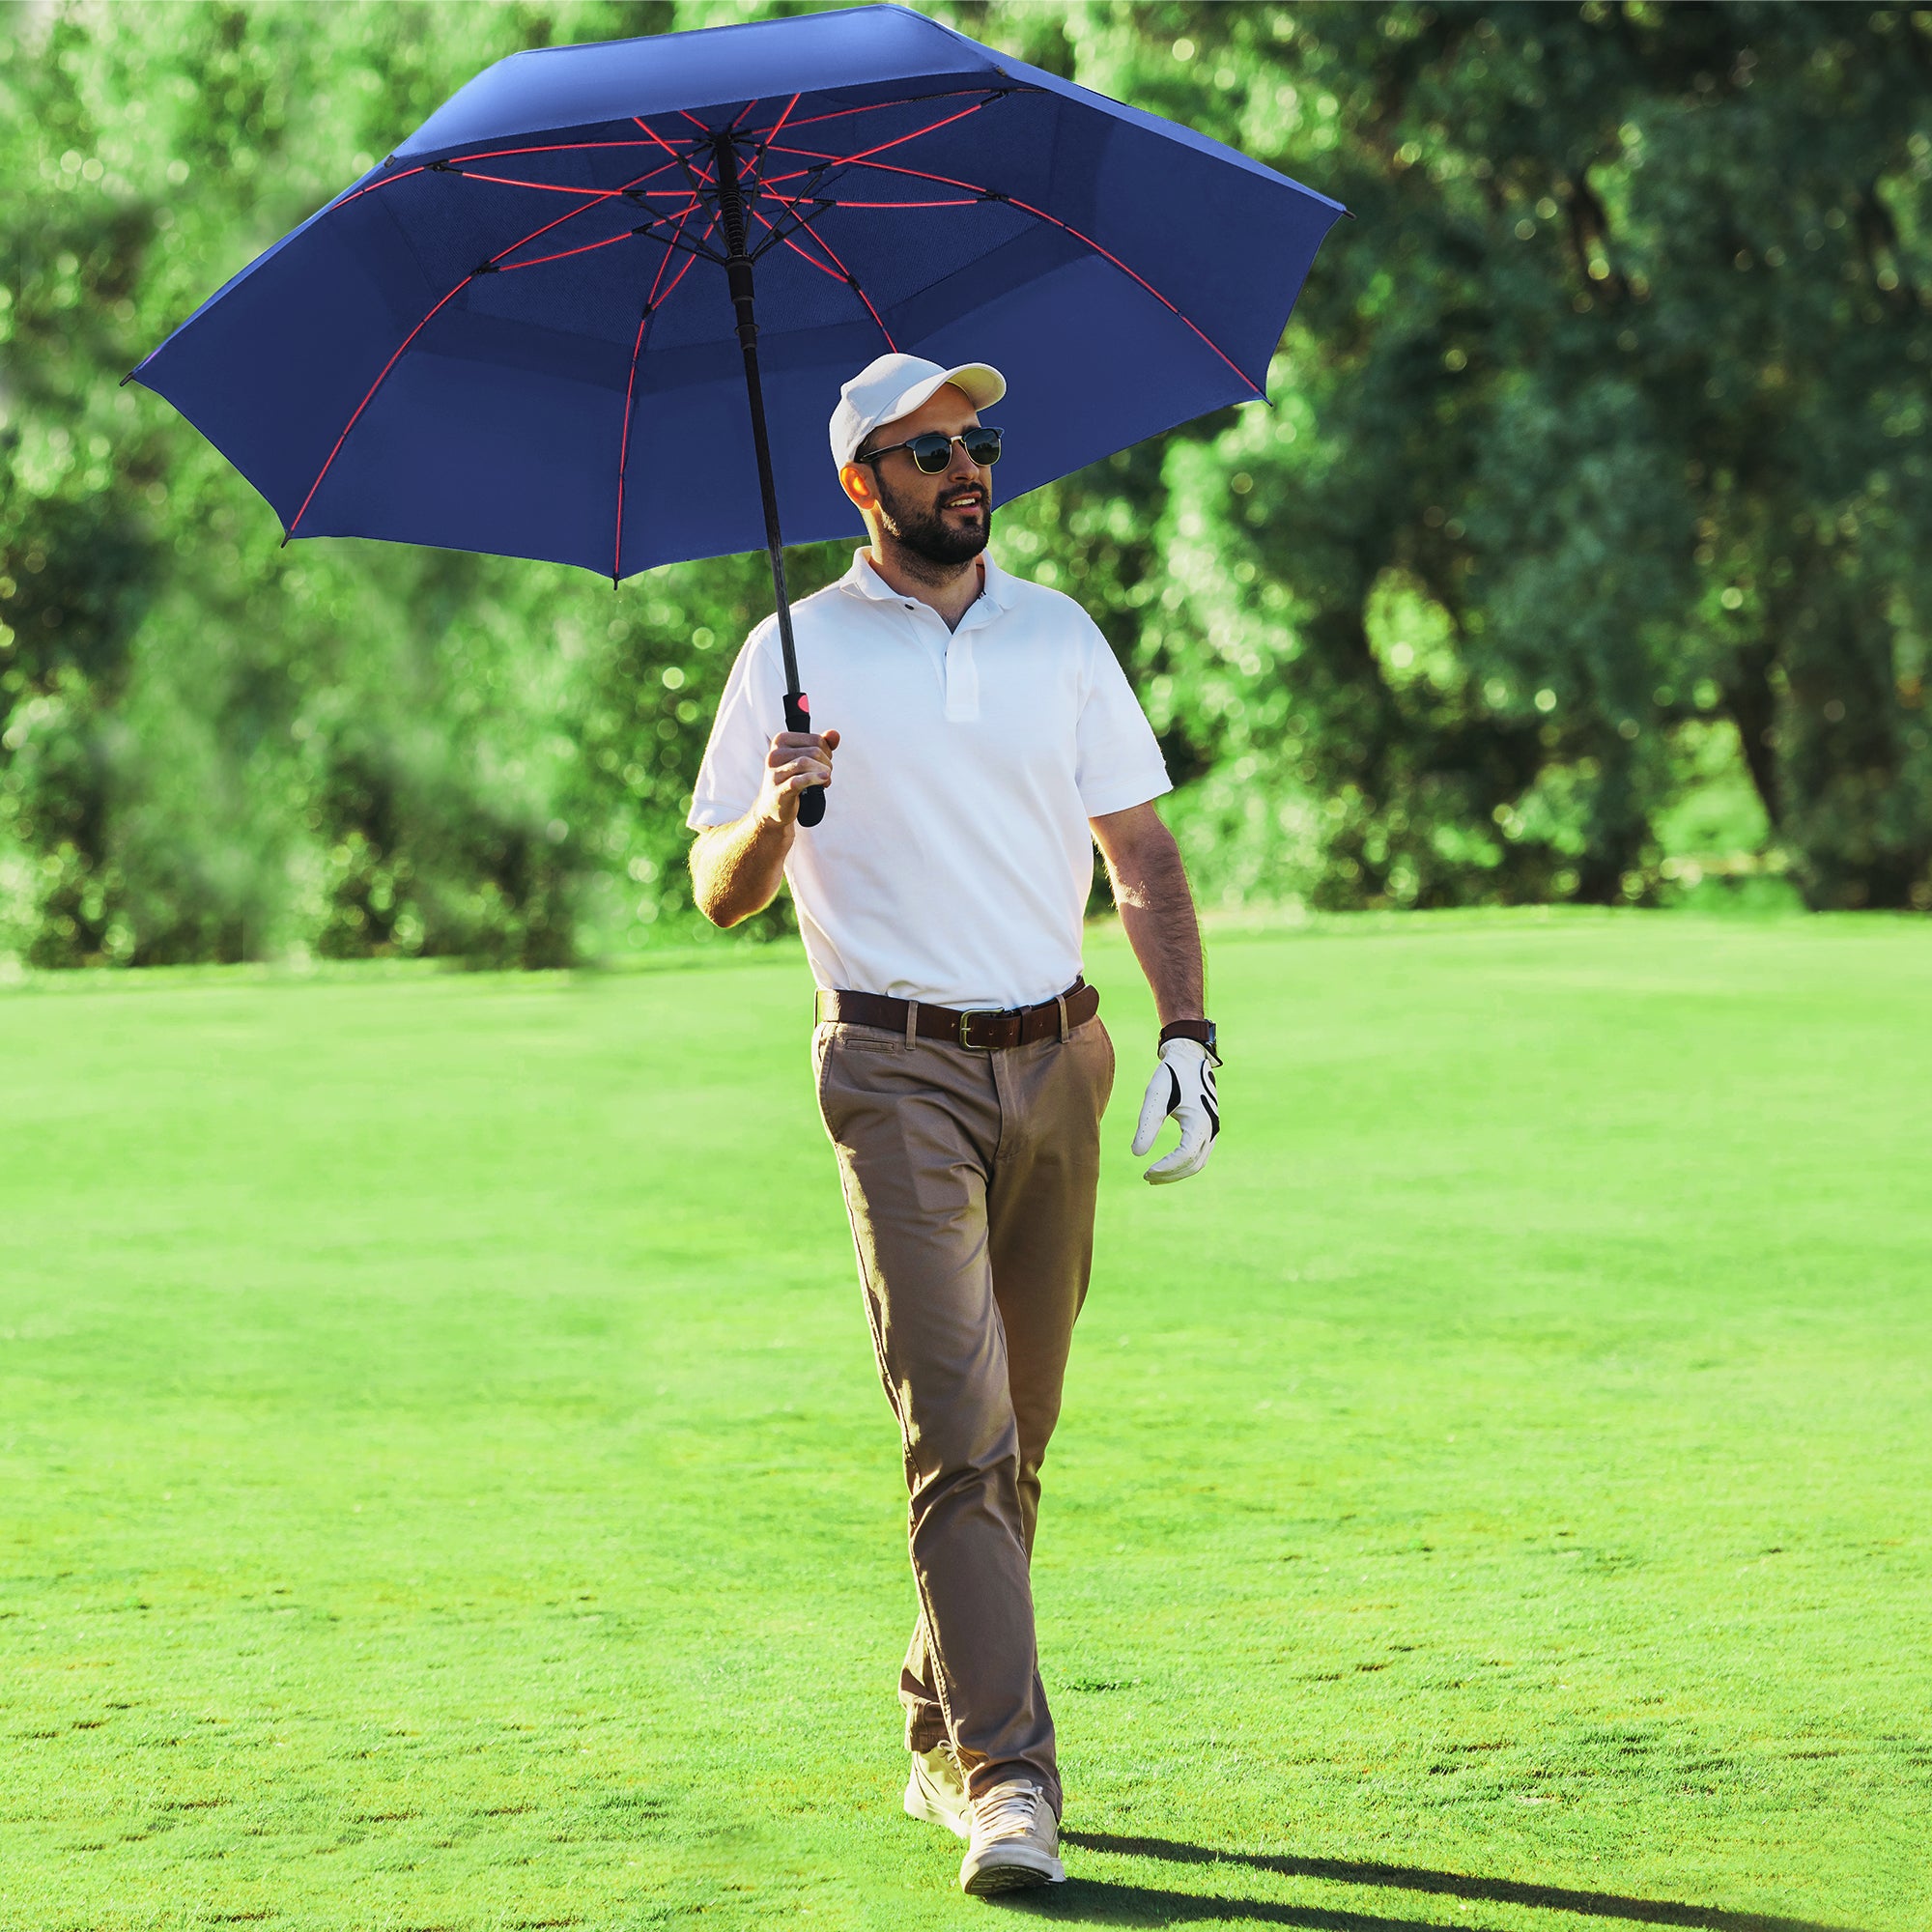 Golf No Matter the Weather with the Repel Golf Umbrella